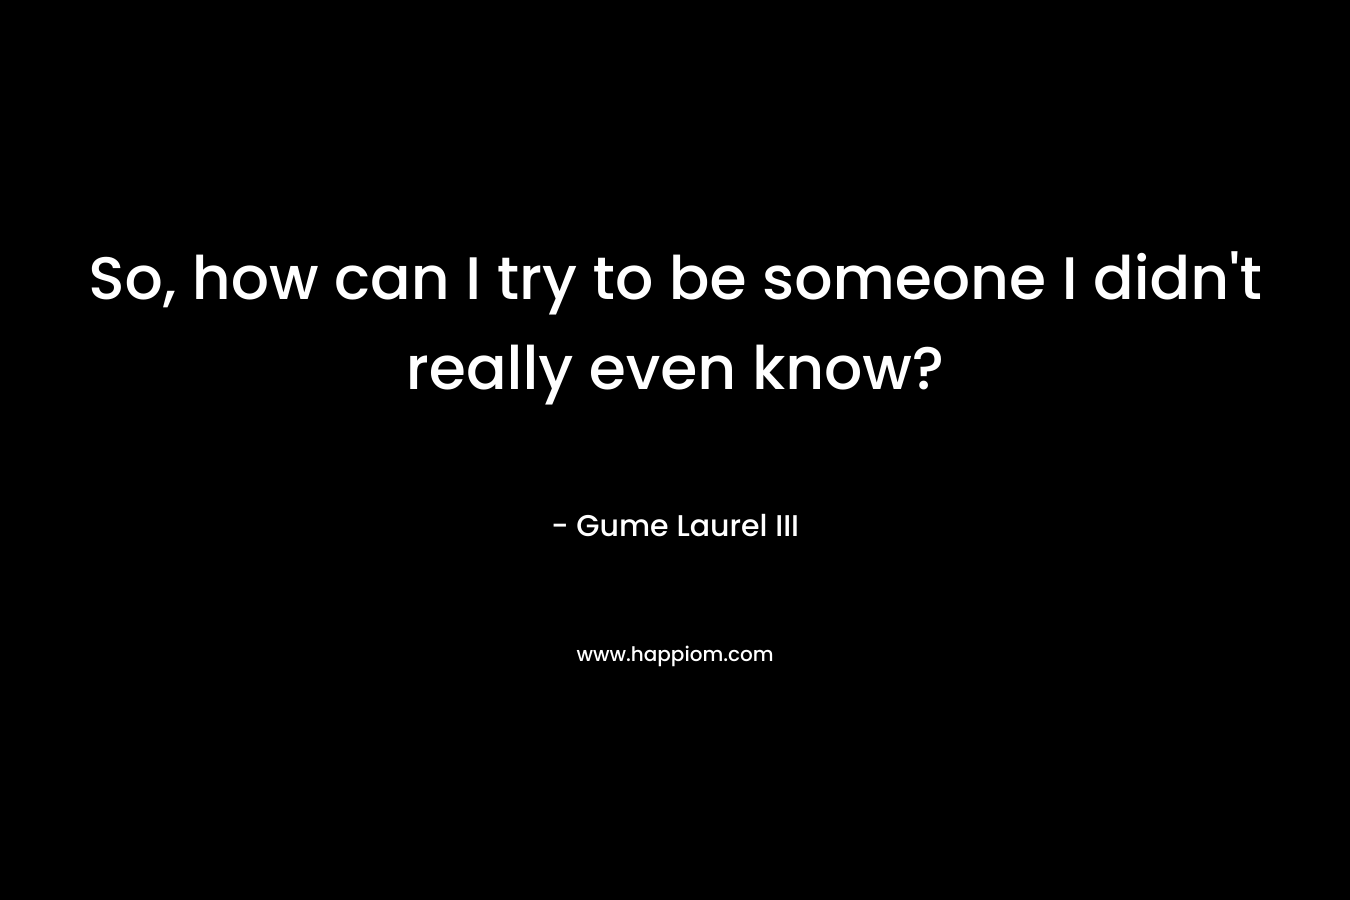 So, how can I try to be someone I didn’t really even know? – Gume Laurel III